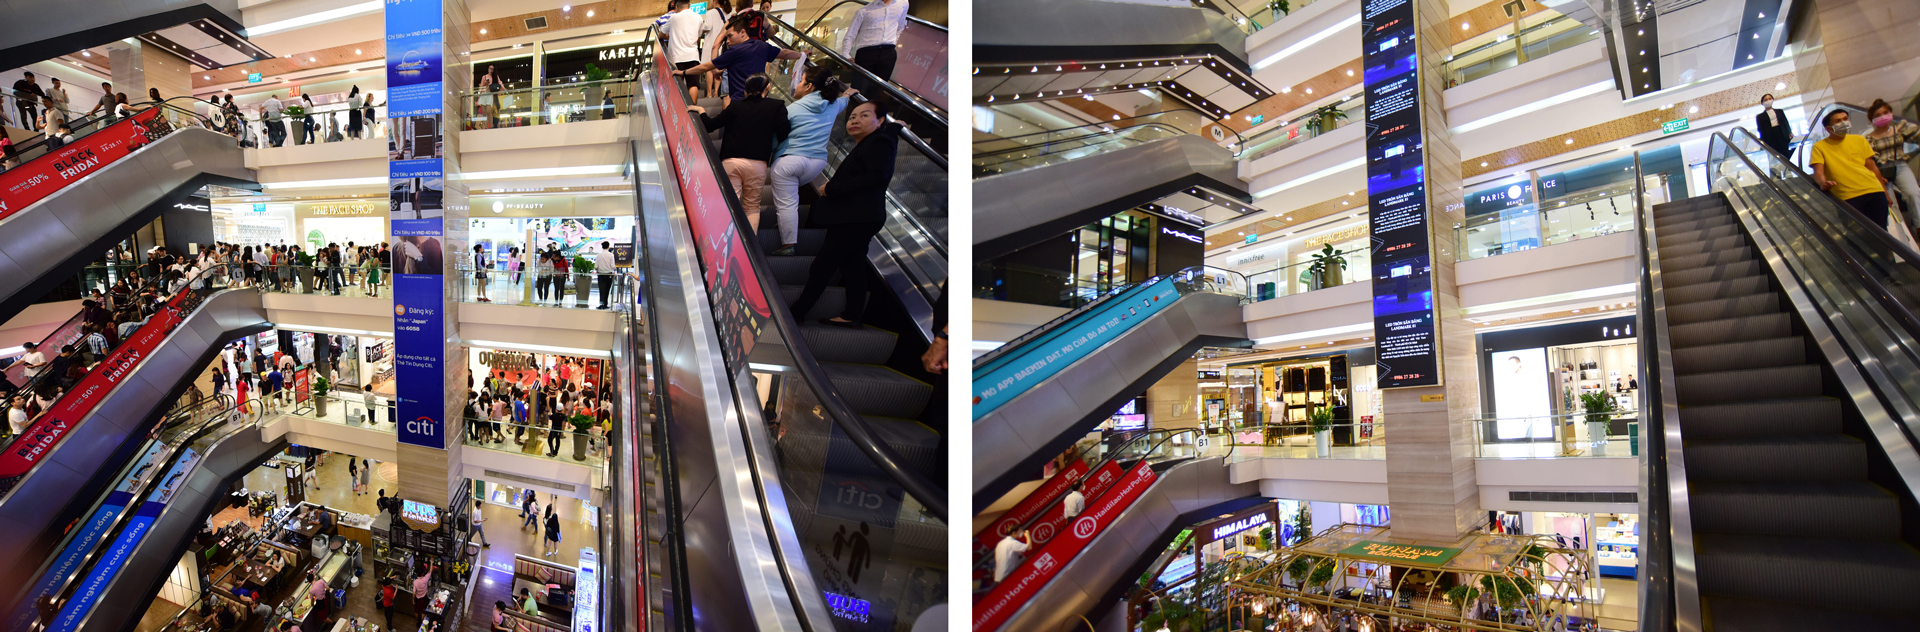 Vincom Shopping Center in District 1, Ho Chi Minh City, Vietnam before (left) and during (right) the COVID-19 epidemic. Photos: Truc Phuong / Tuoi Tre